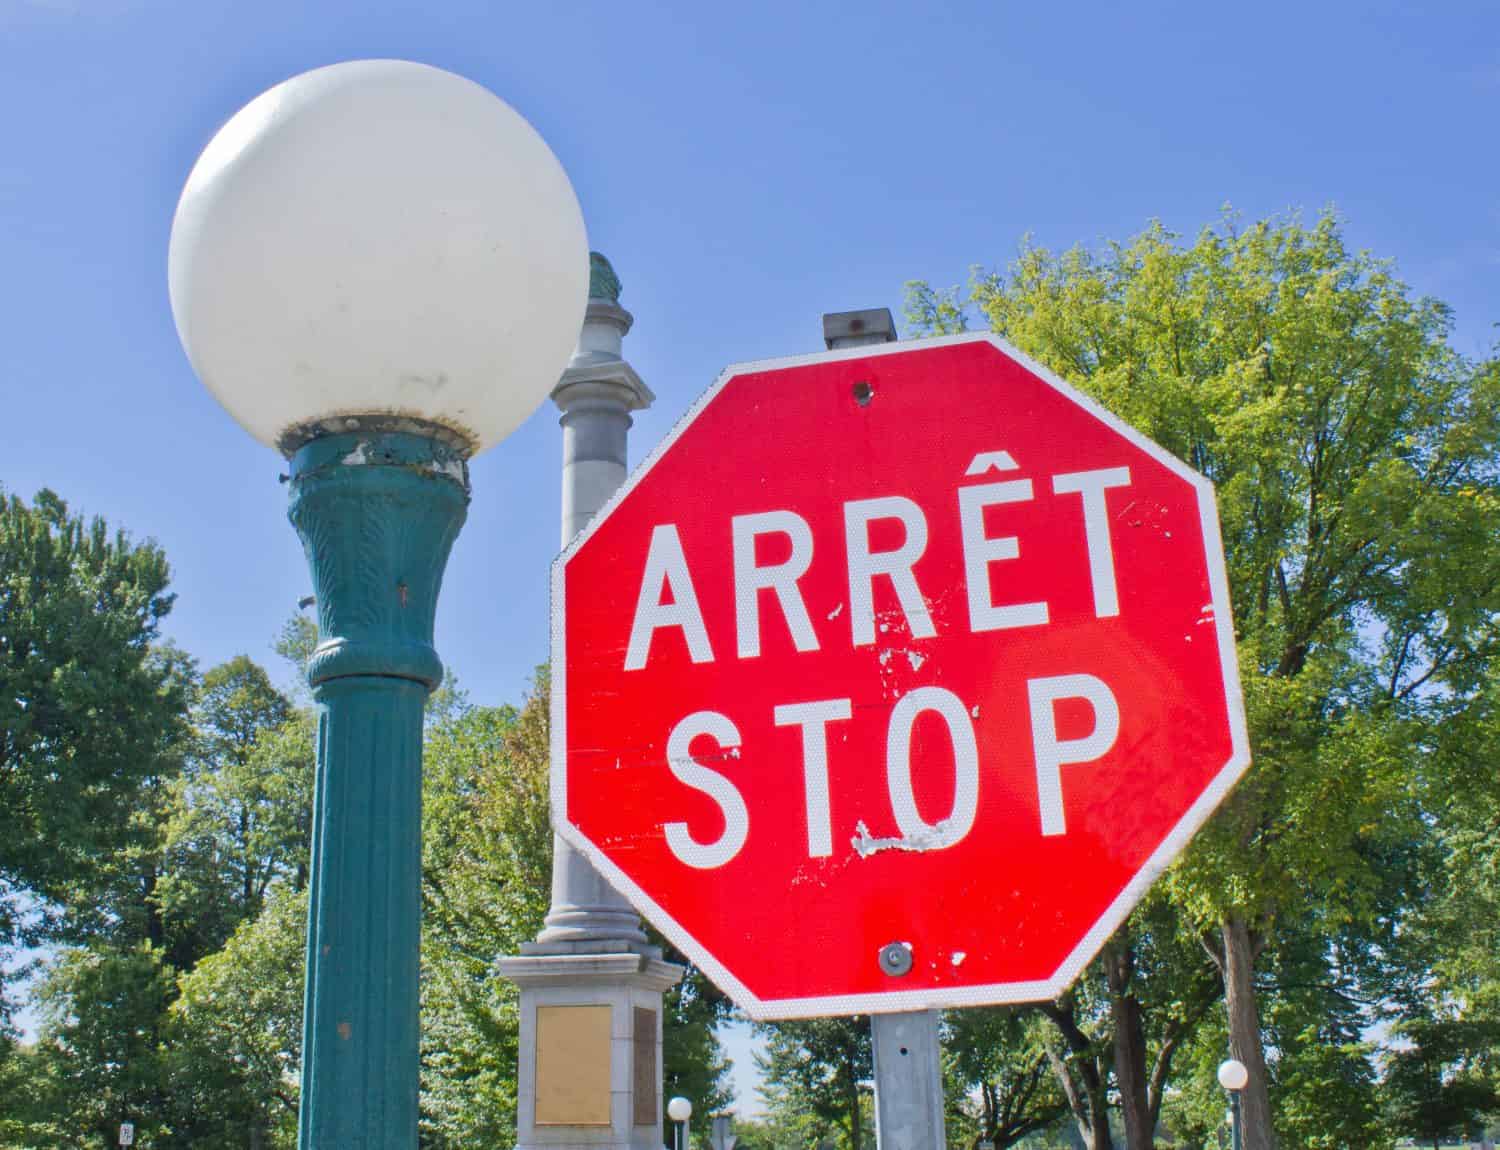 A bilingual French and English, red and white stop sign beside a classic lamp post at the entrance to a park in Quebec City, Canada.